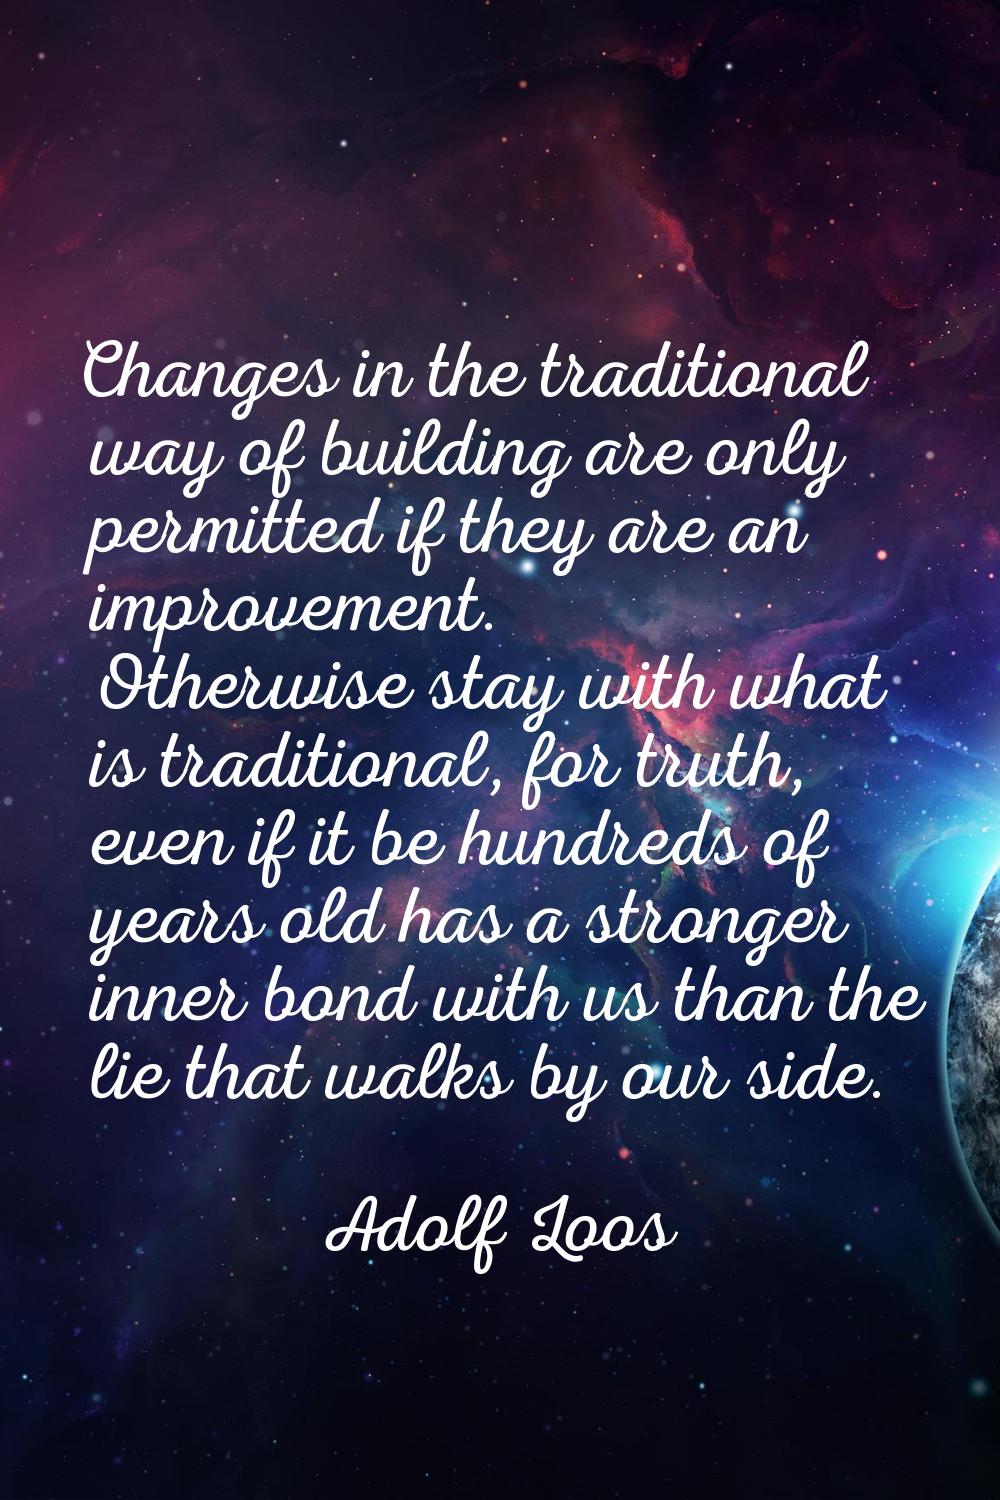 Changes in the traditional way of building are only permitted if they are an improvement. Otherwise